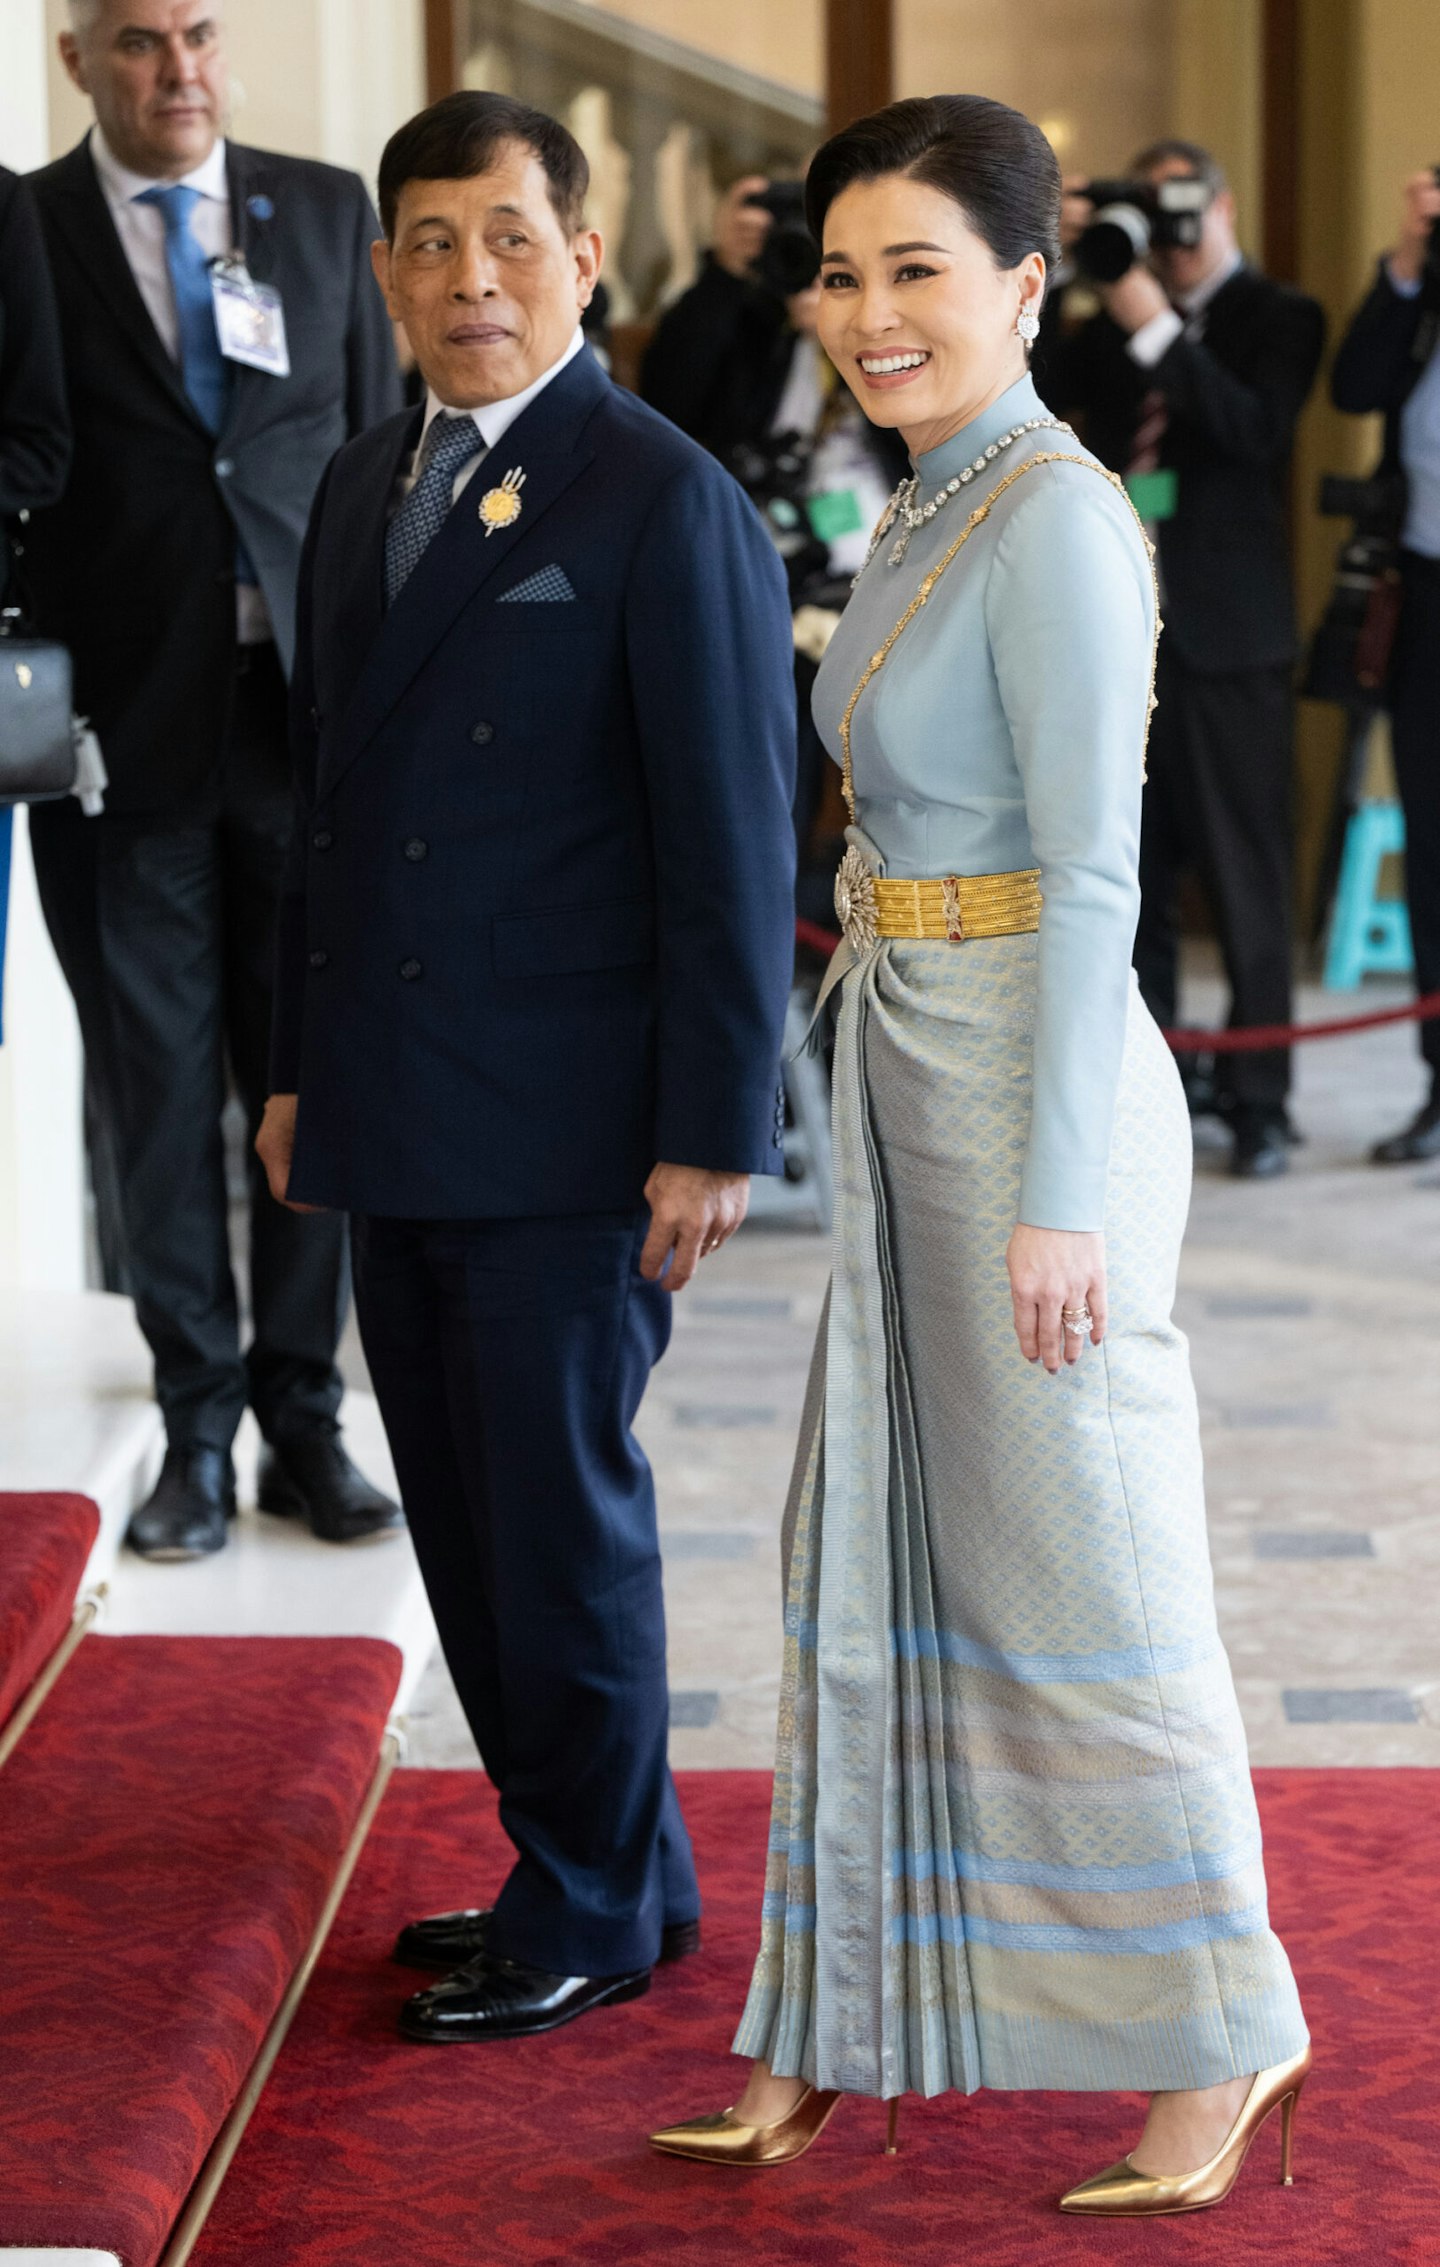 Queen Suthida and King Vajiralongkorn of Thailand attend the Coronation Reception For Overseas Guests